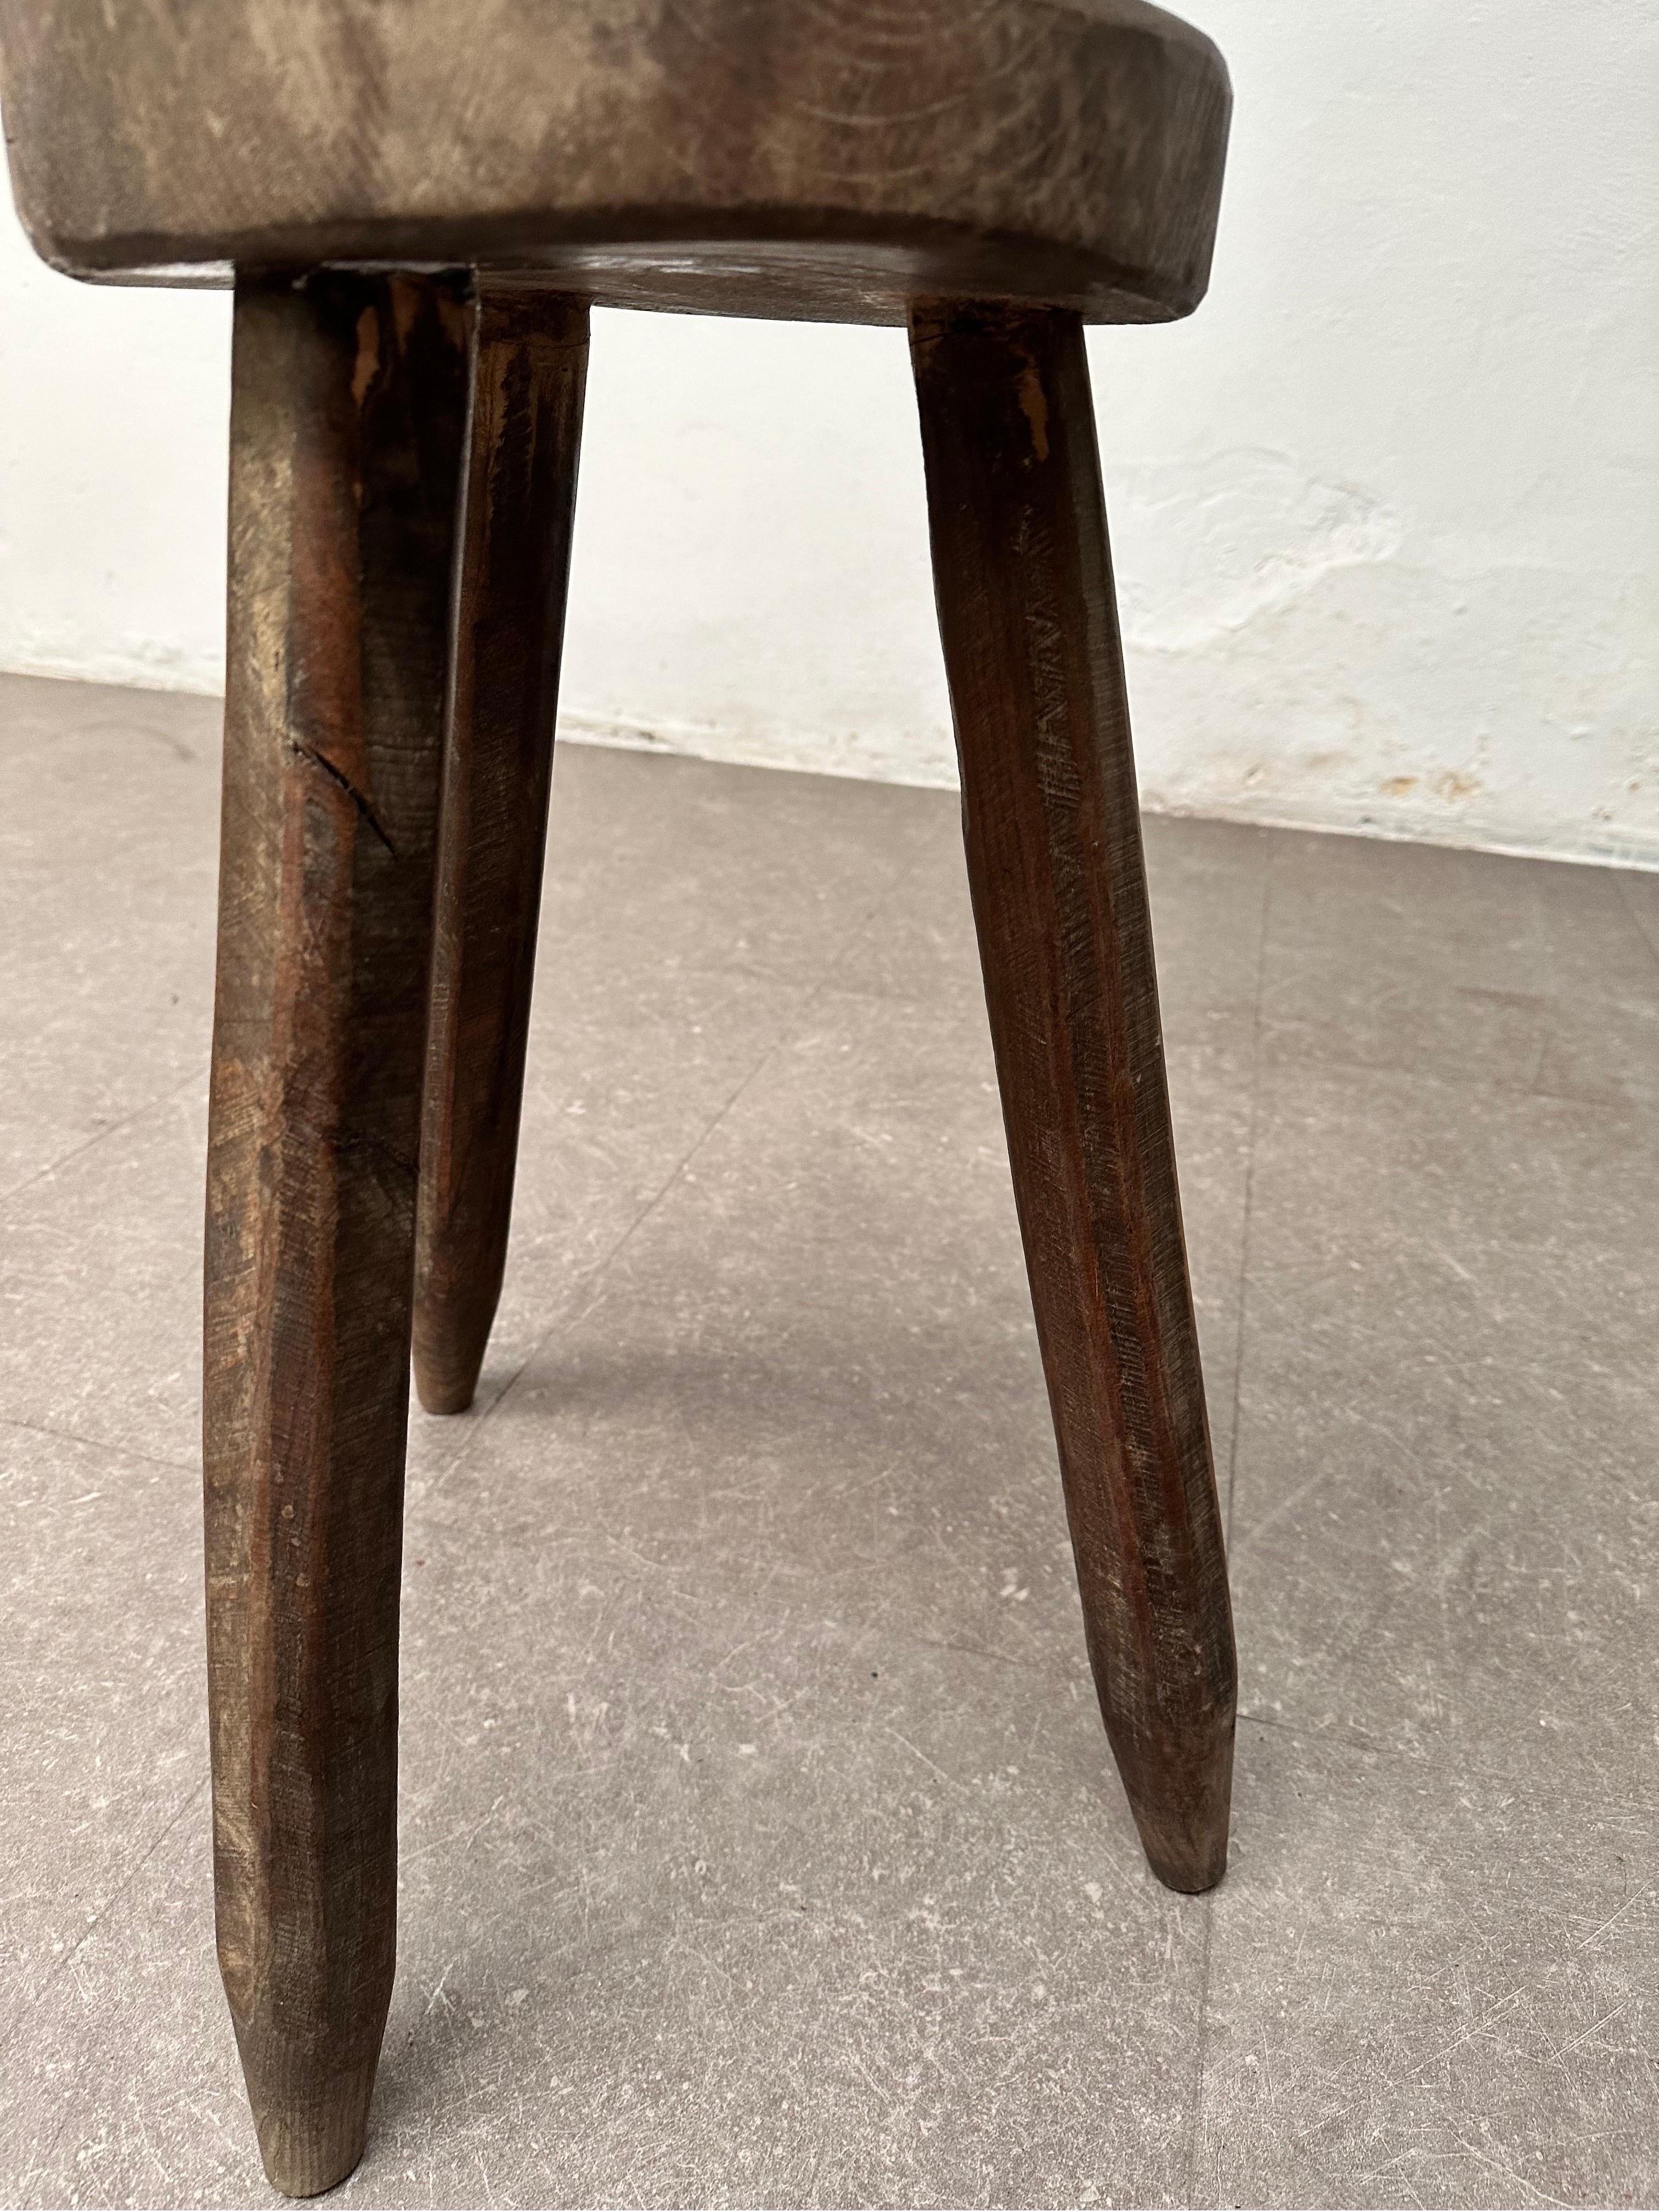 French Brutalist Tripod Stool, 1960s - Embrace the Charm of Primitive Elegance For Sale 1